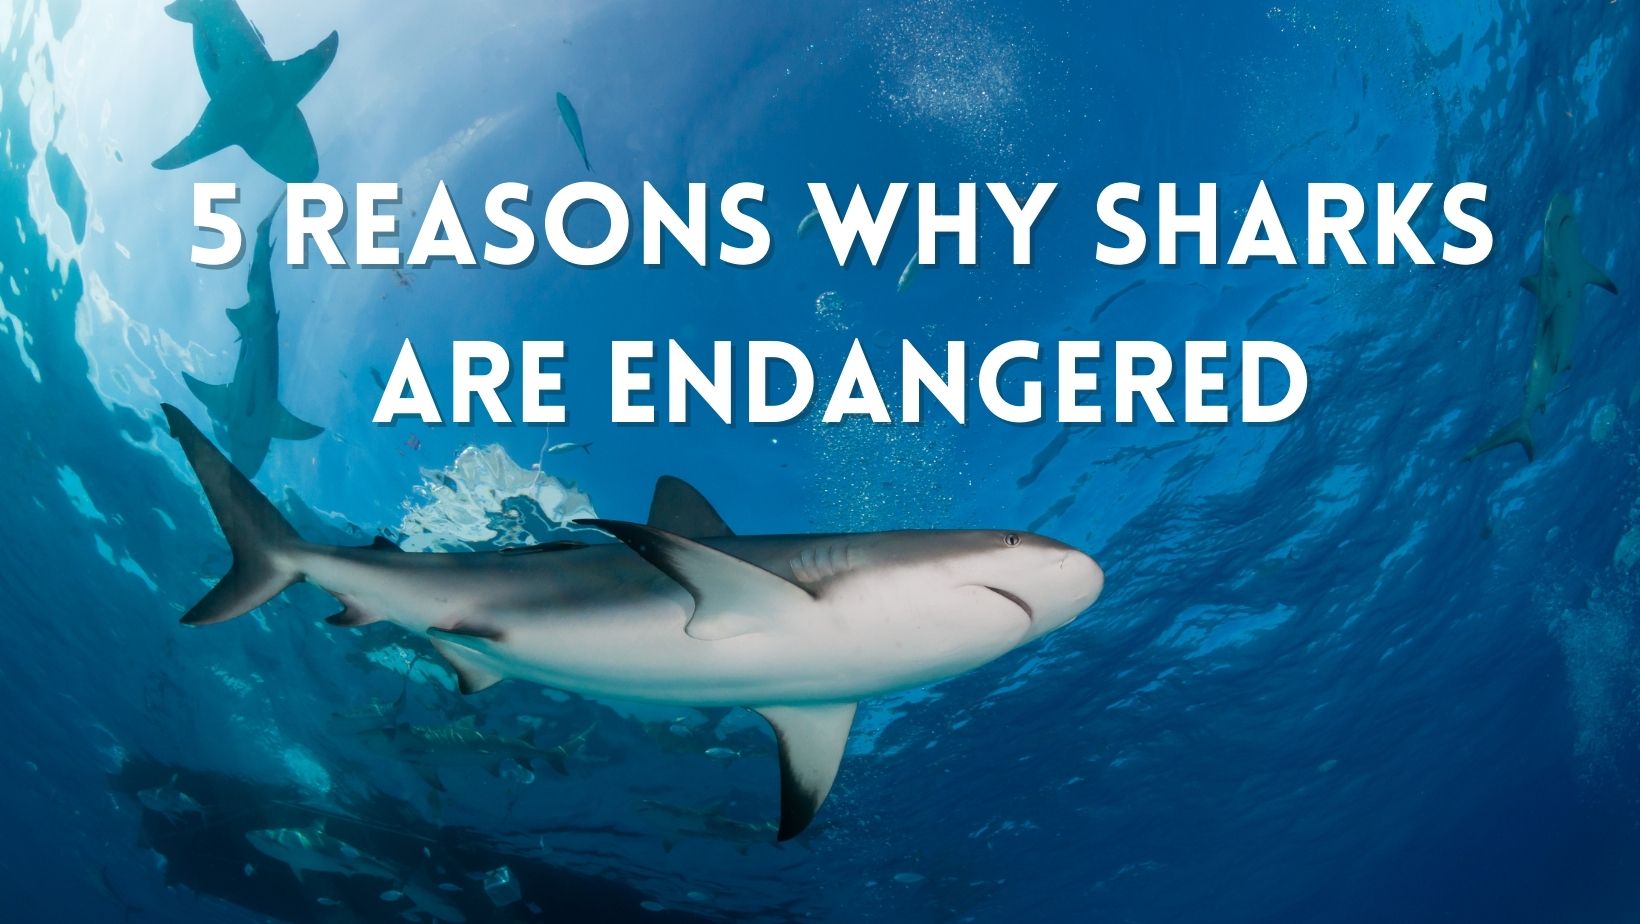 Reasons why sharks are endangered